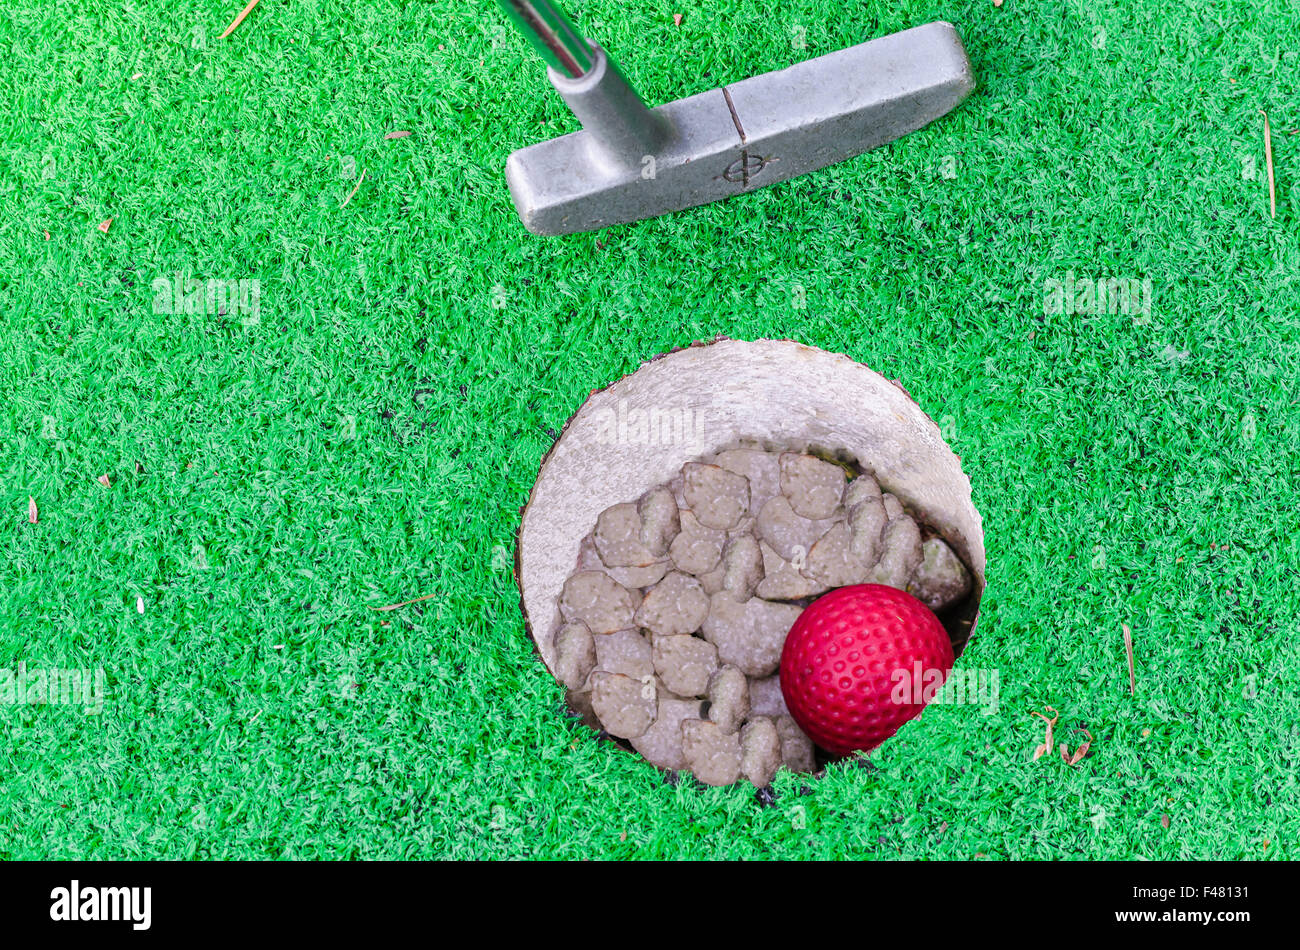 Close-up Mini Golf hole with bat and ball Stock Photo